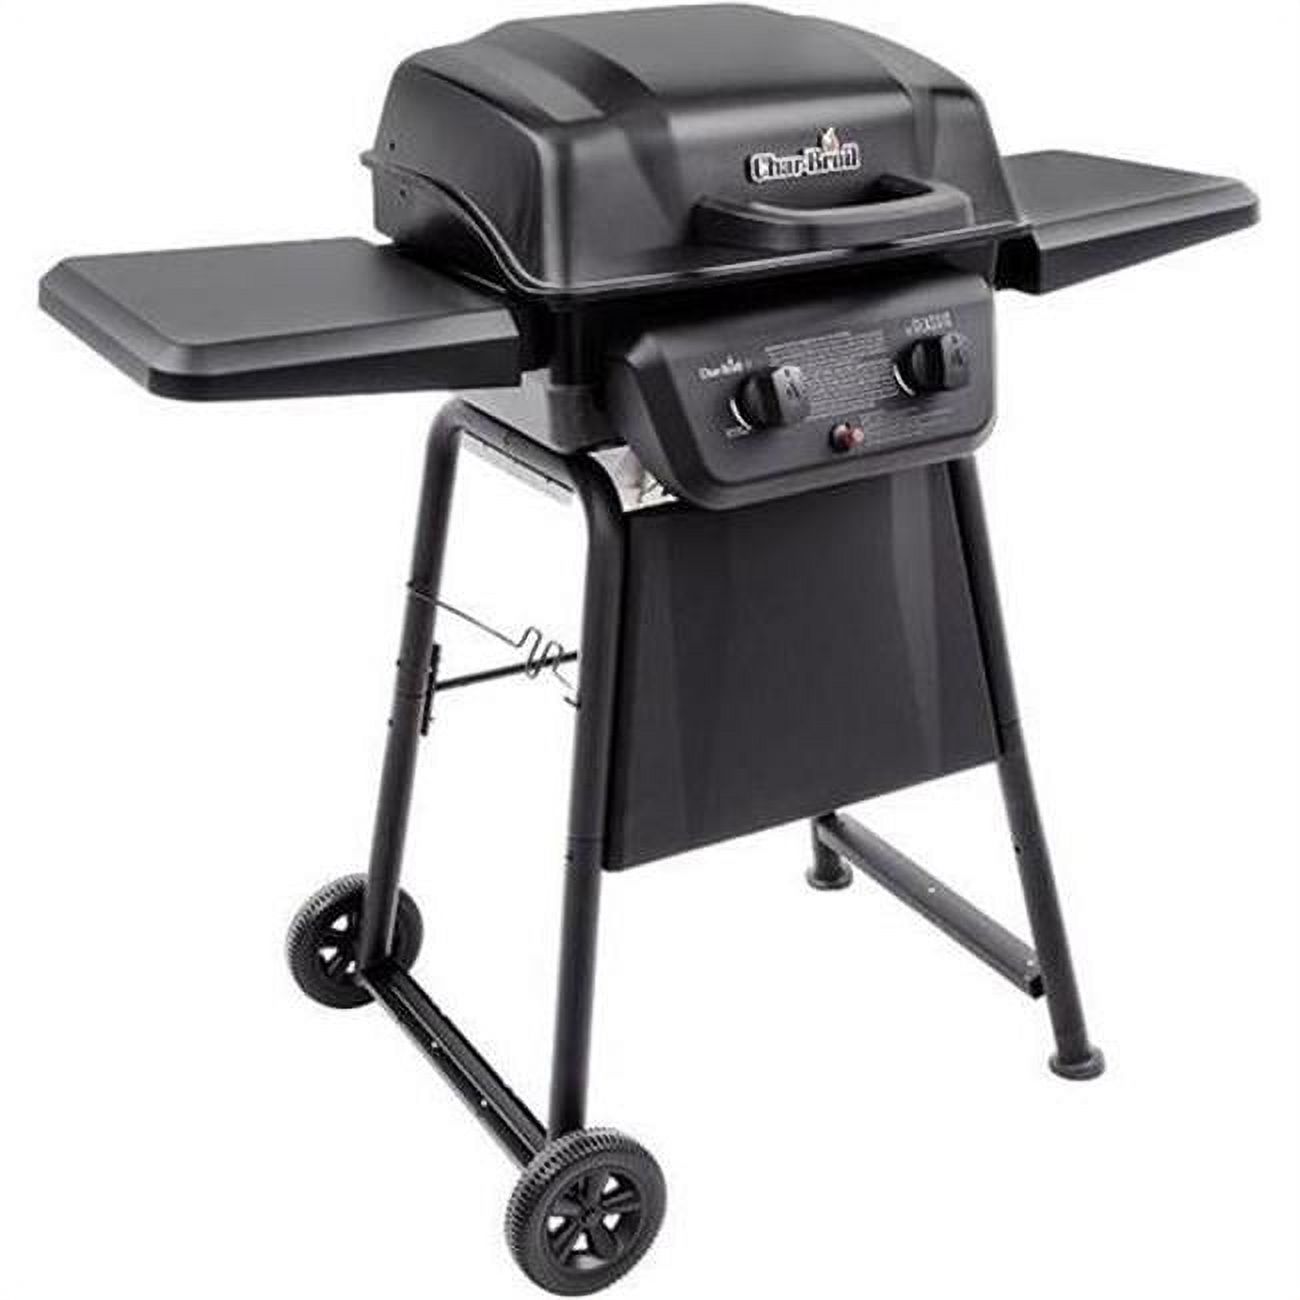 Char-Broil 463672717 Gas Grill Stainless Steel - image 1 of 10